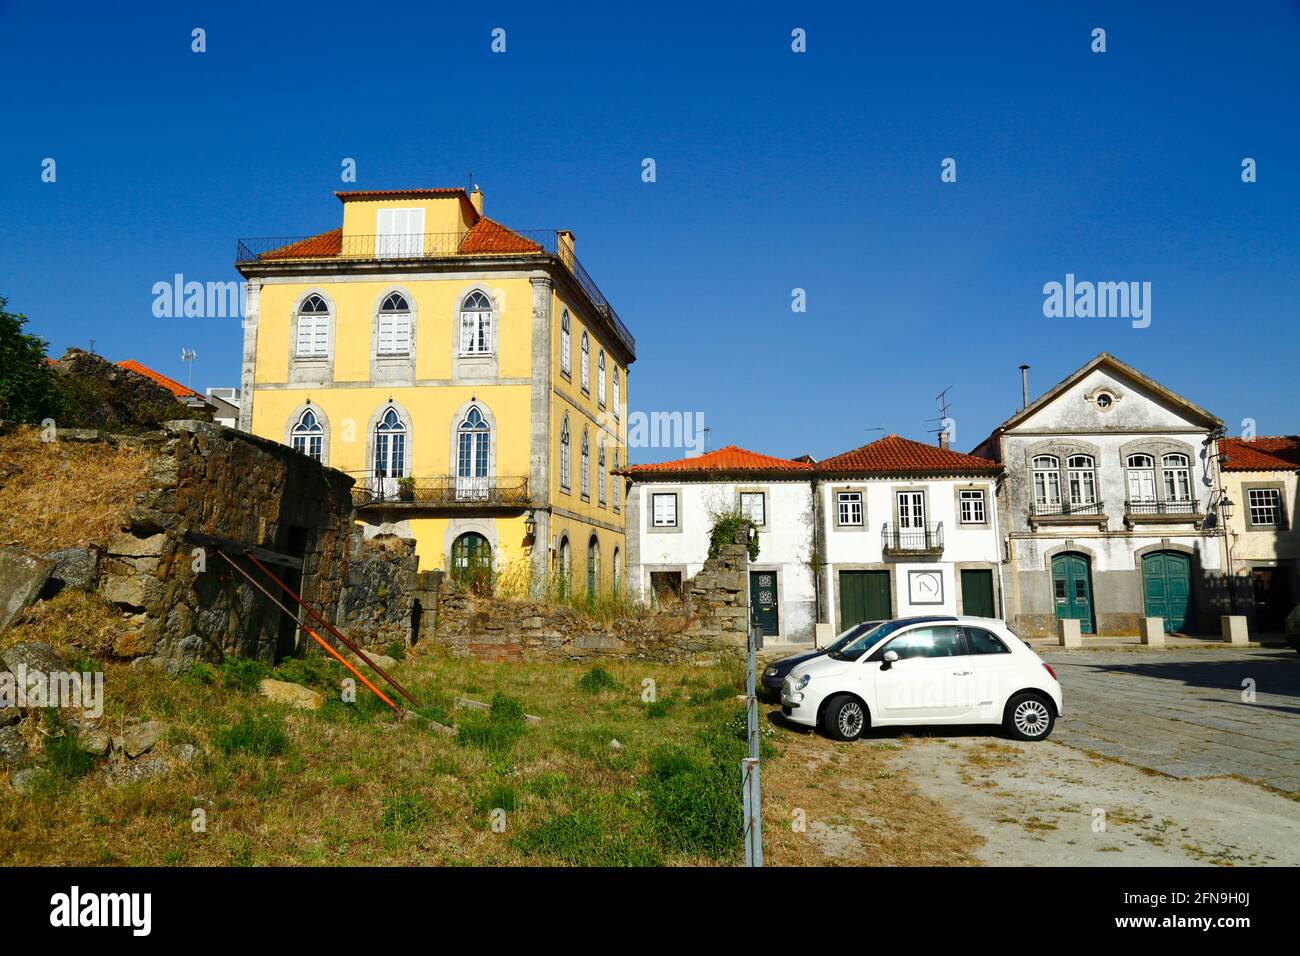 Collapsing section of old town defensive wall with supports next to parish church / Igreja Matriz, Caminha, Minho Province, Portugal Stock Photo